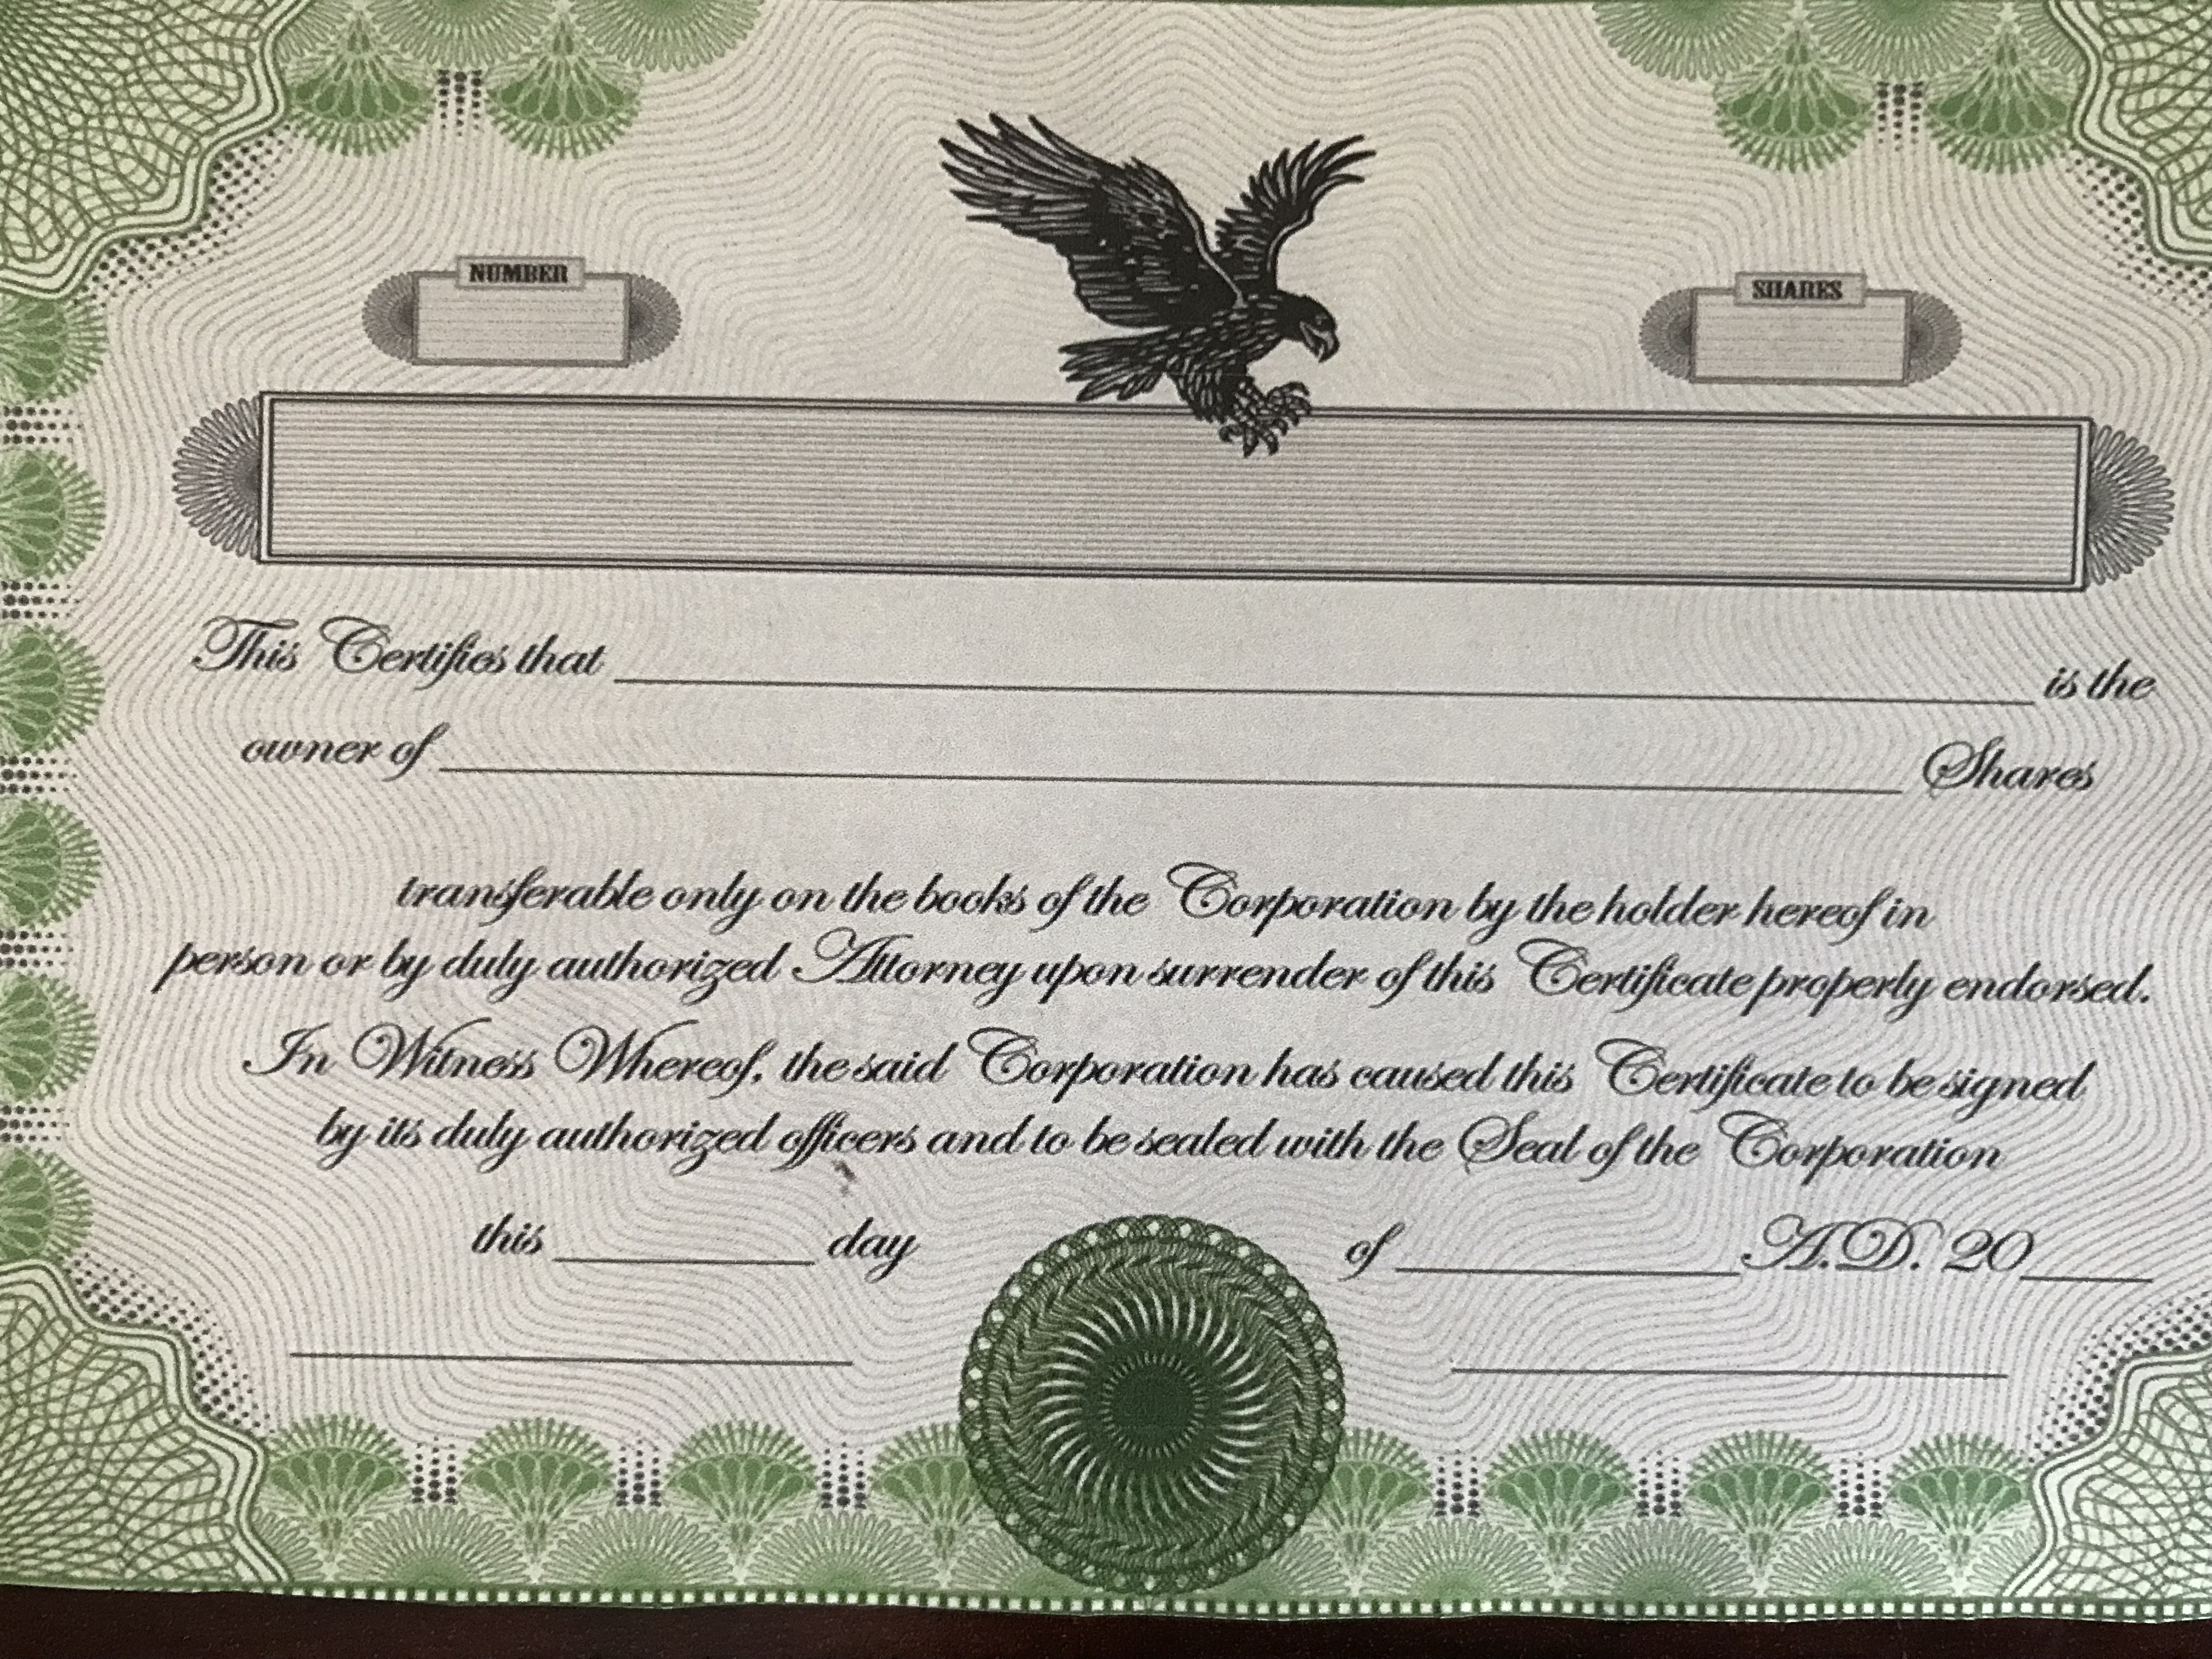 Black Shopping Channel Stock Certificate 